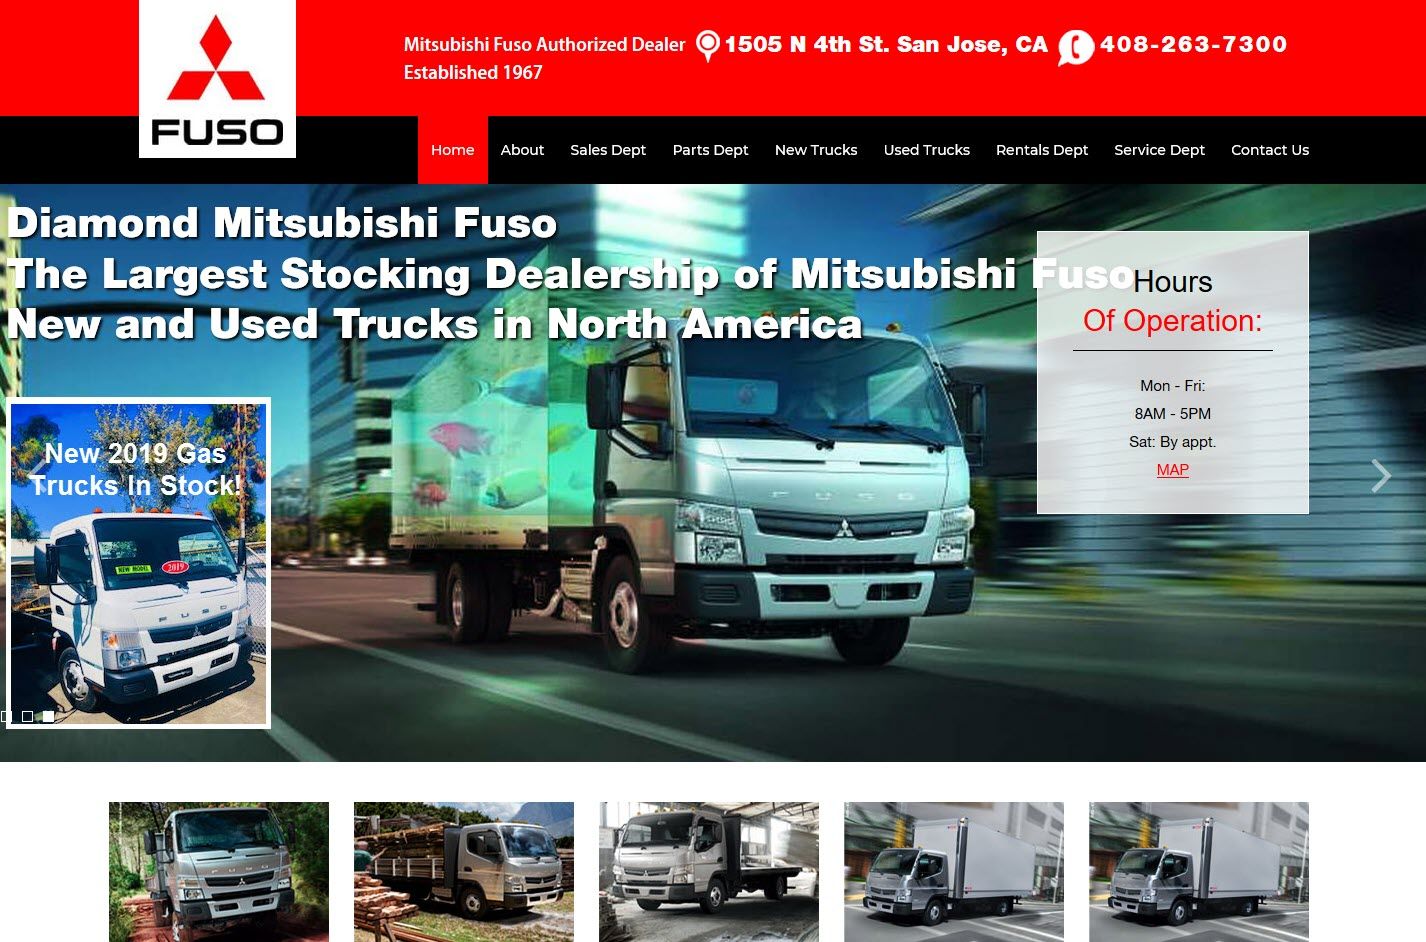 Commercial Truck and vehicle website design